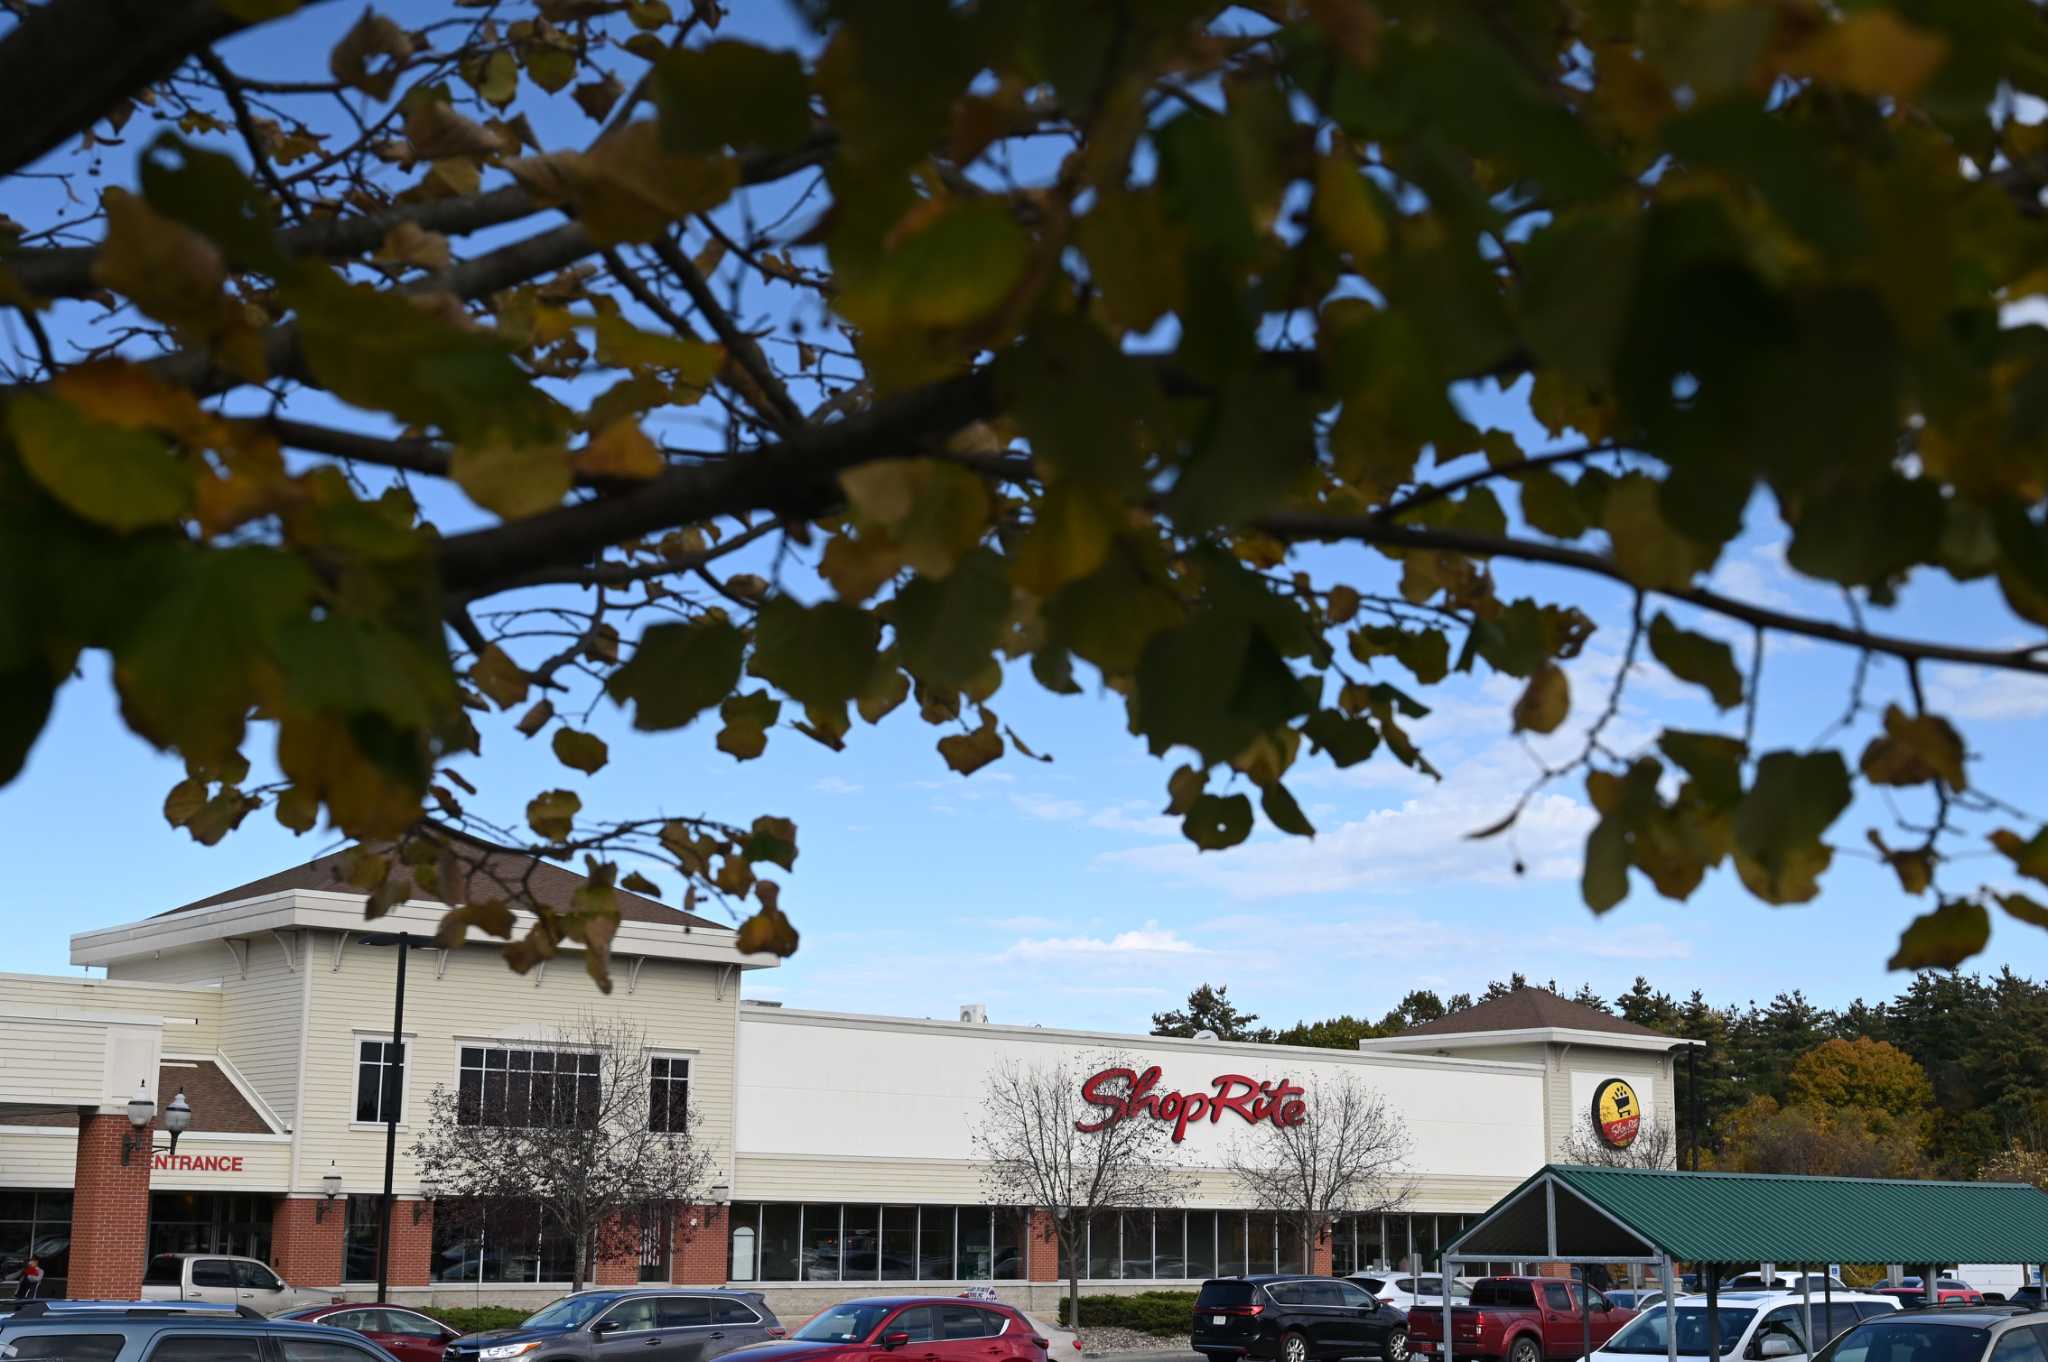 Wegmans says it won't replace closing Albany-area ShopRite stores